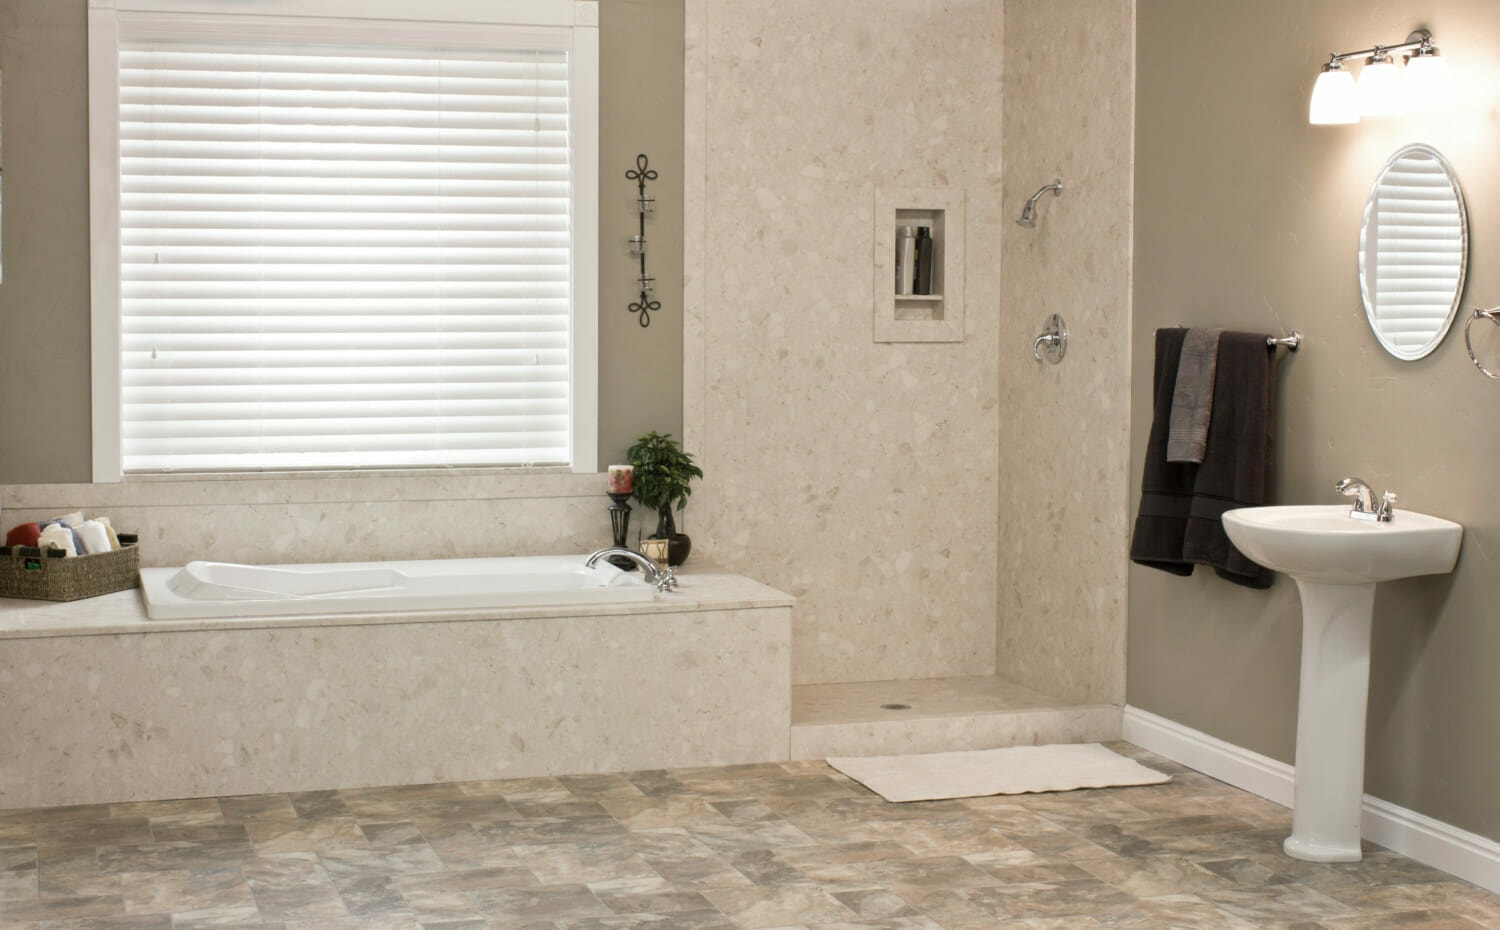 Five Star Bath Solutions of Red Bank Lifetime Warranty, Waterproof for life